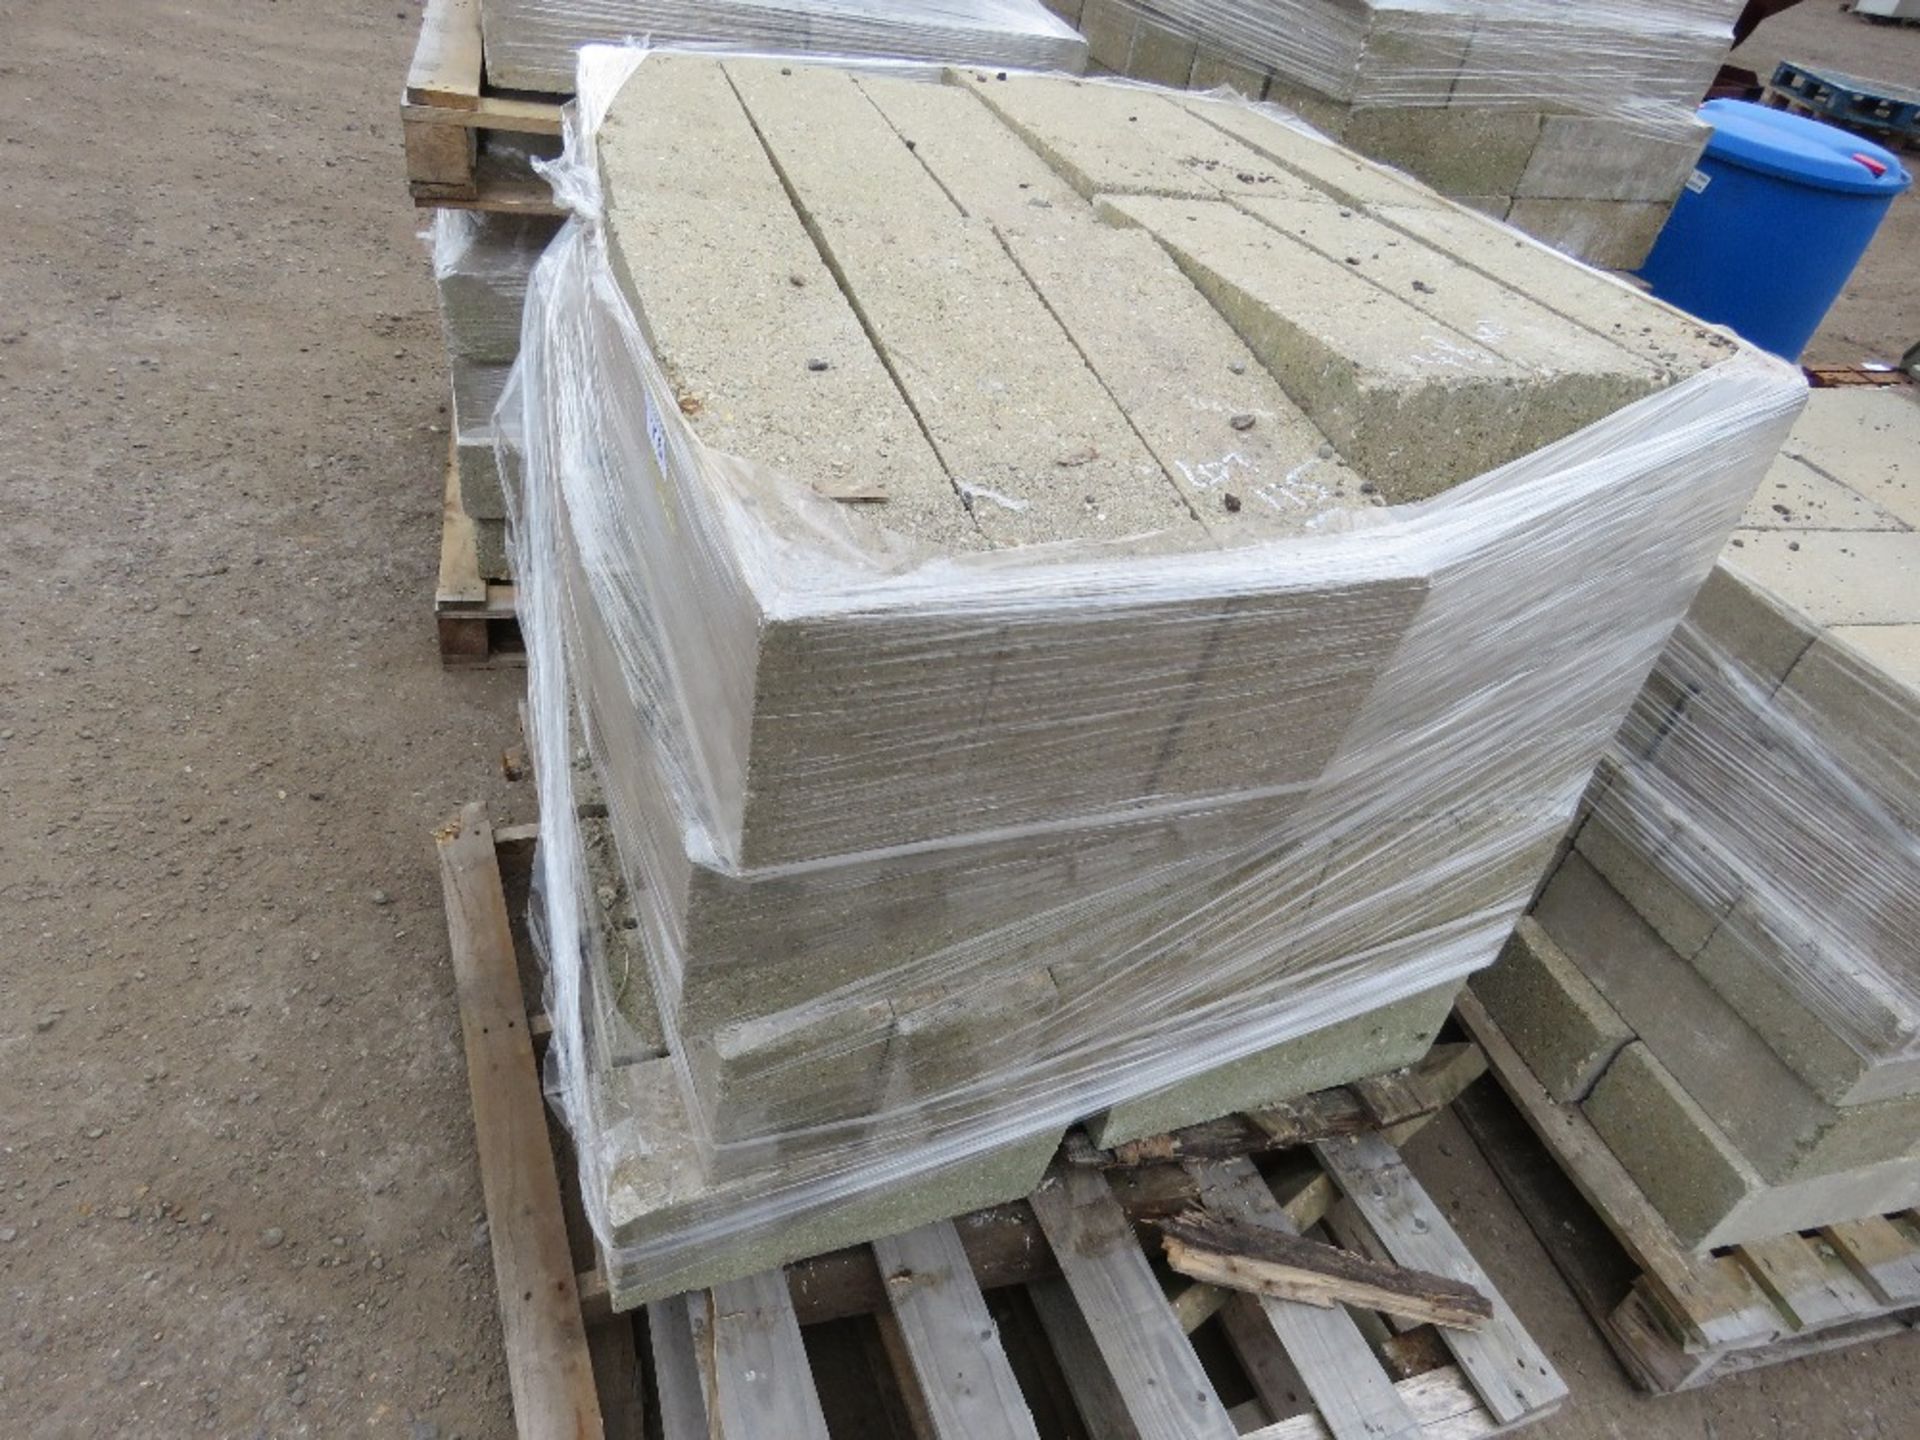 4 X PALLETS OF SOLID CONCRETE BLOCKS, 21CM X 44CM X 14CM APPROX. 190NO IN TOTAL APPROX. THIS LOT IS - Image 2 of 4